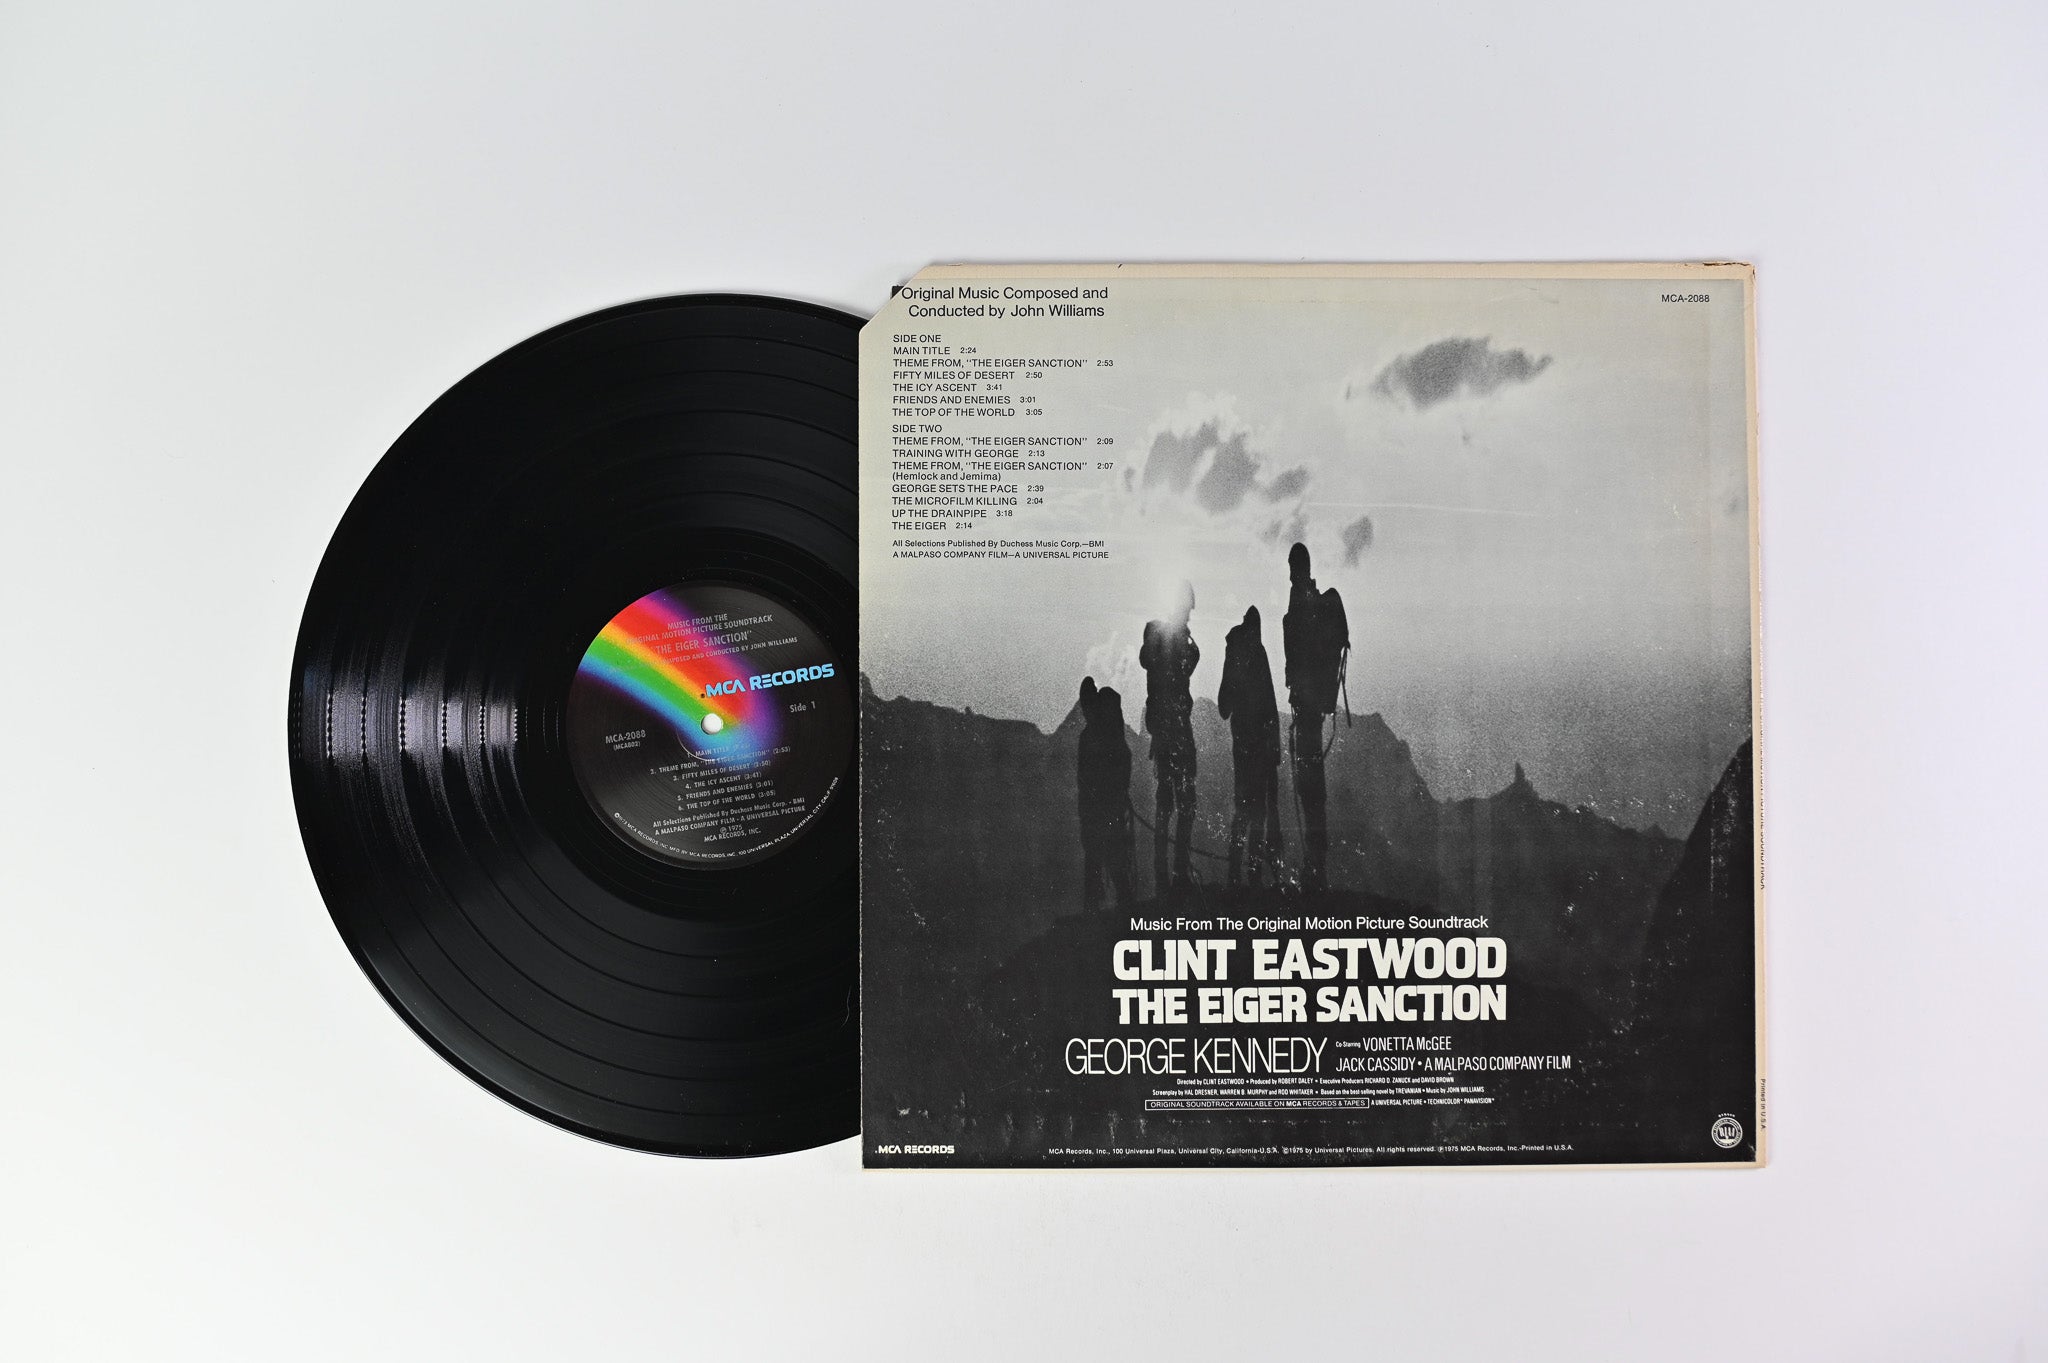 John Williams - The Eiger Sanction (Music From The Original Motion Picture Soundtrack) on MCA Records